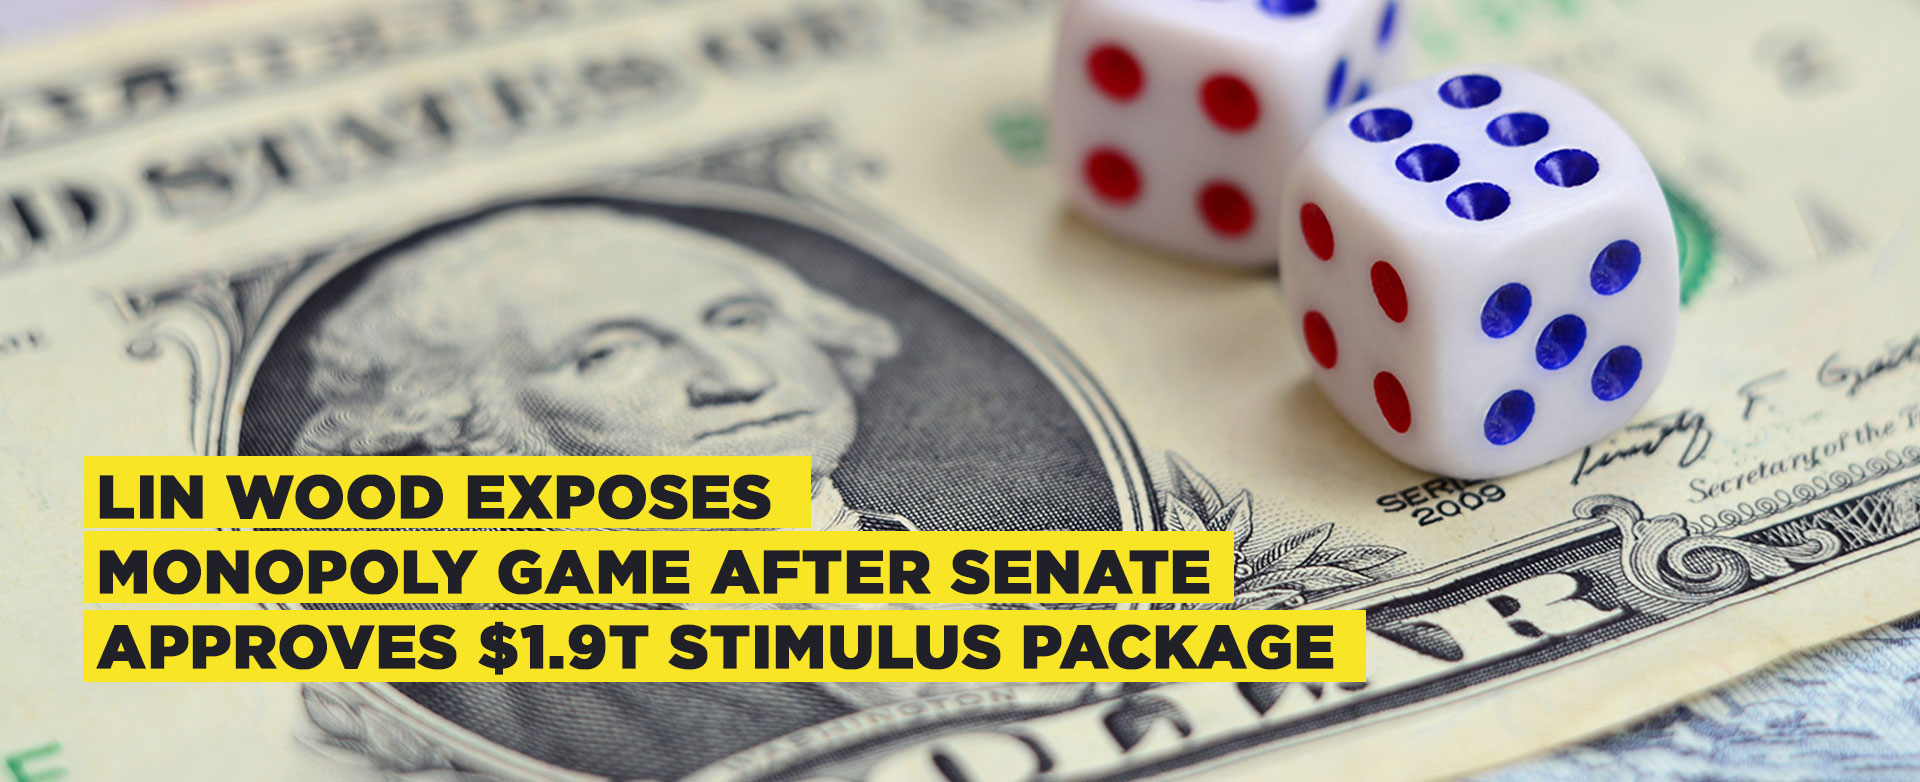 MyPatriotsNetwork-Lin Wood Exposes Monopoly Game After Senate Approves $1.9T Stimulus Package